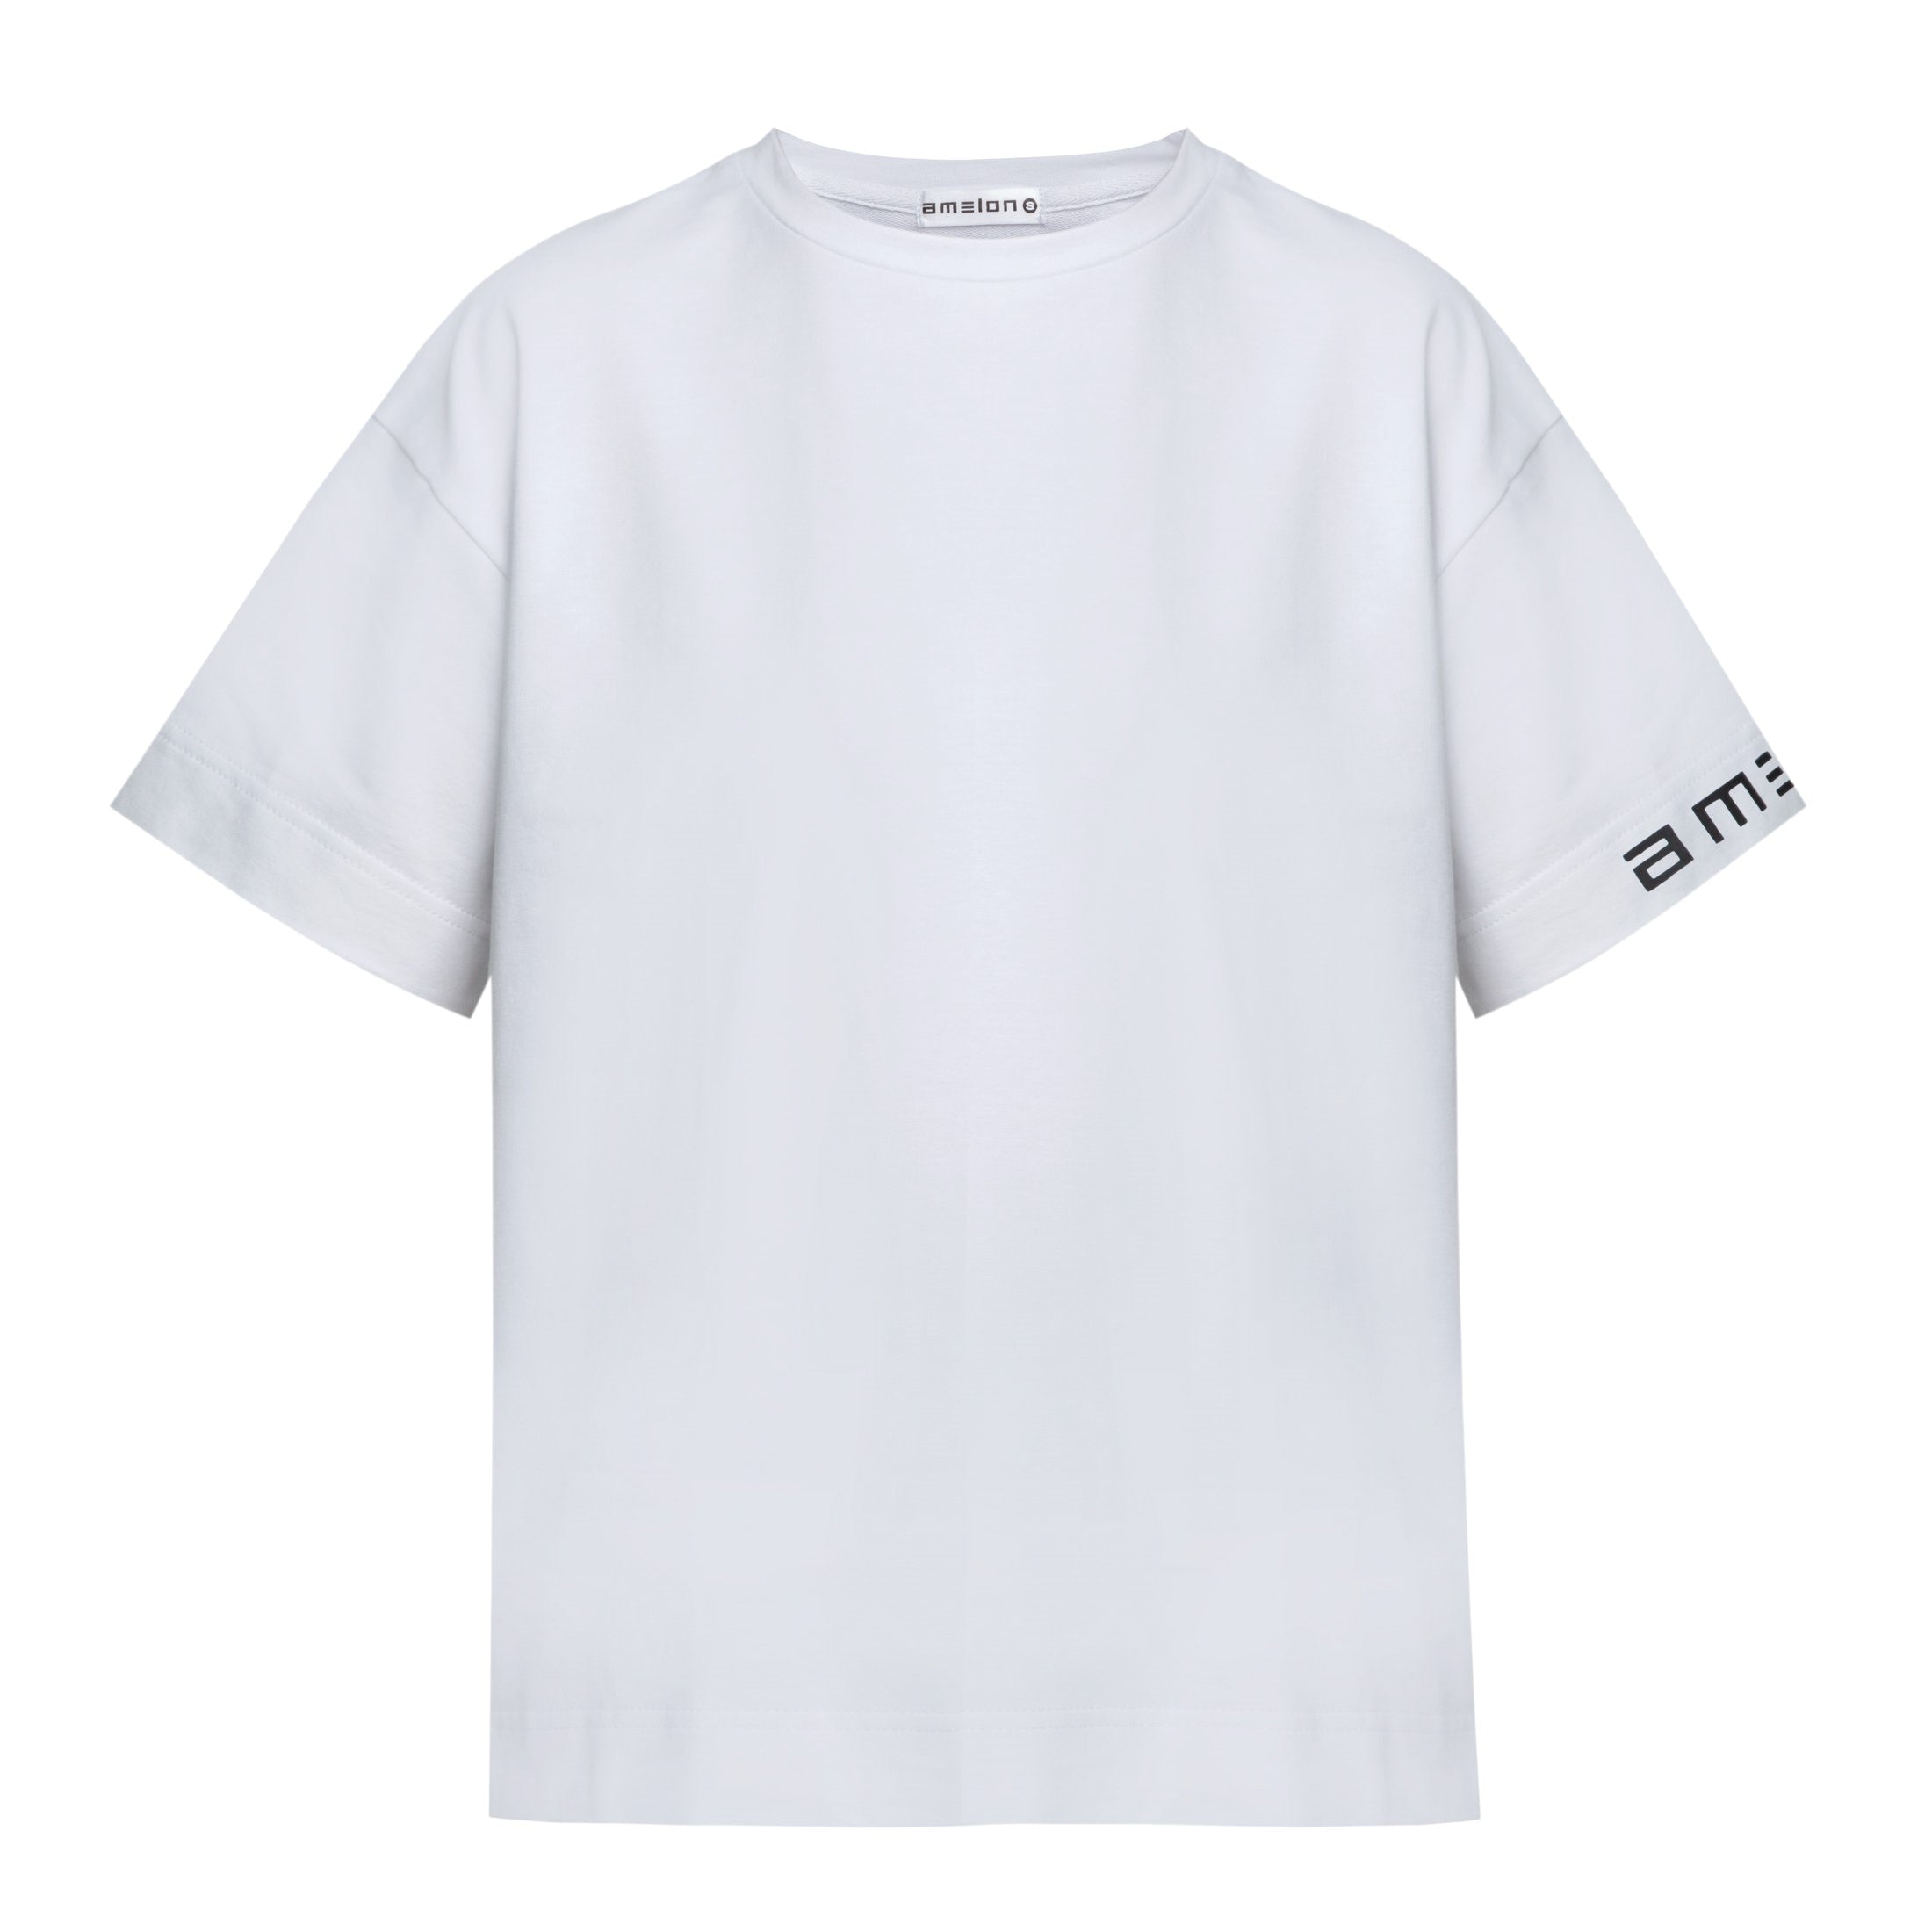 Straight women's T-shirt in white color, logo on the sleeve